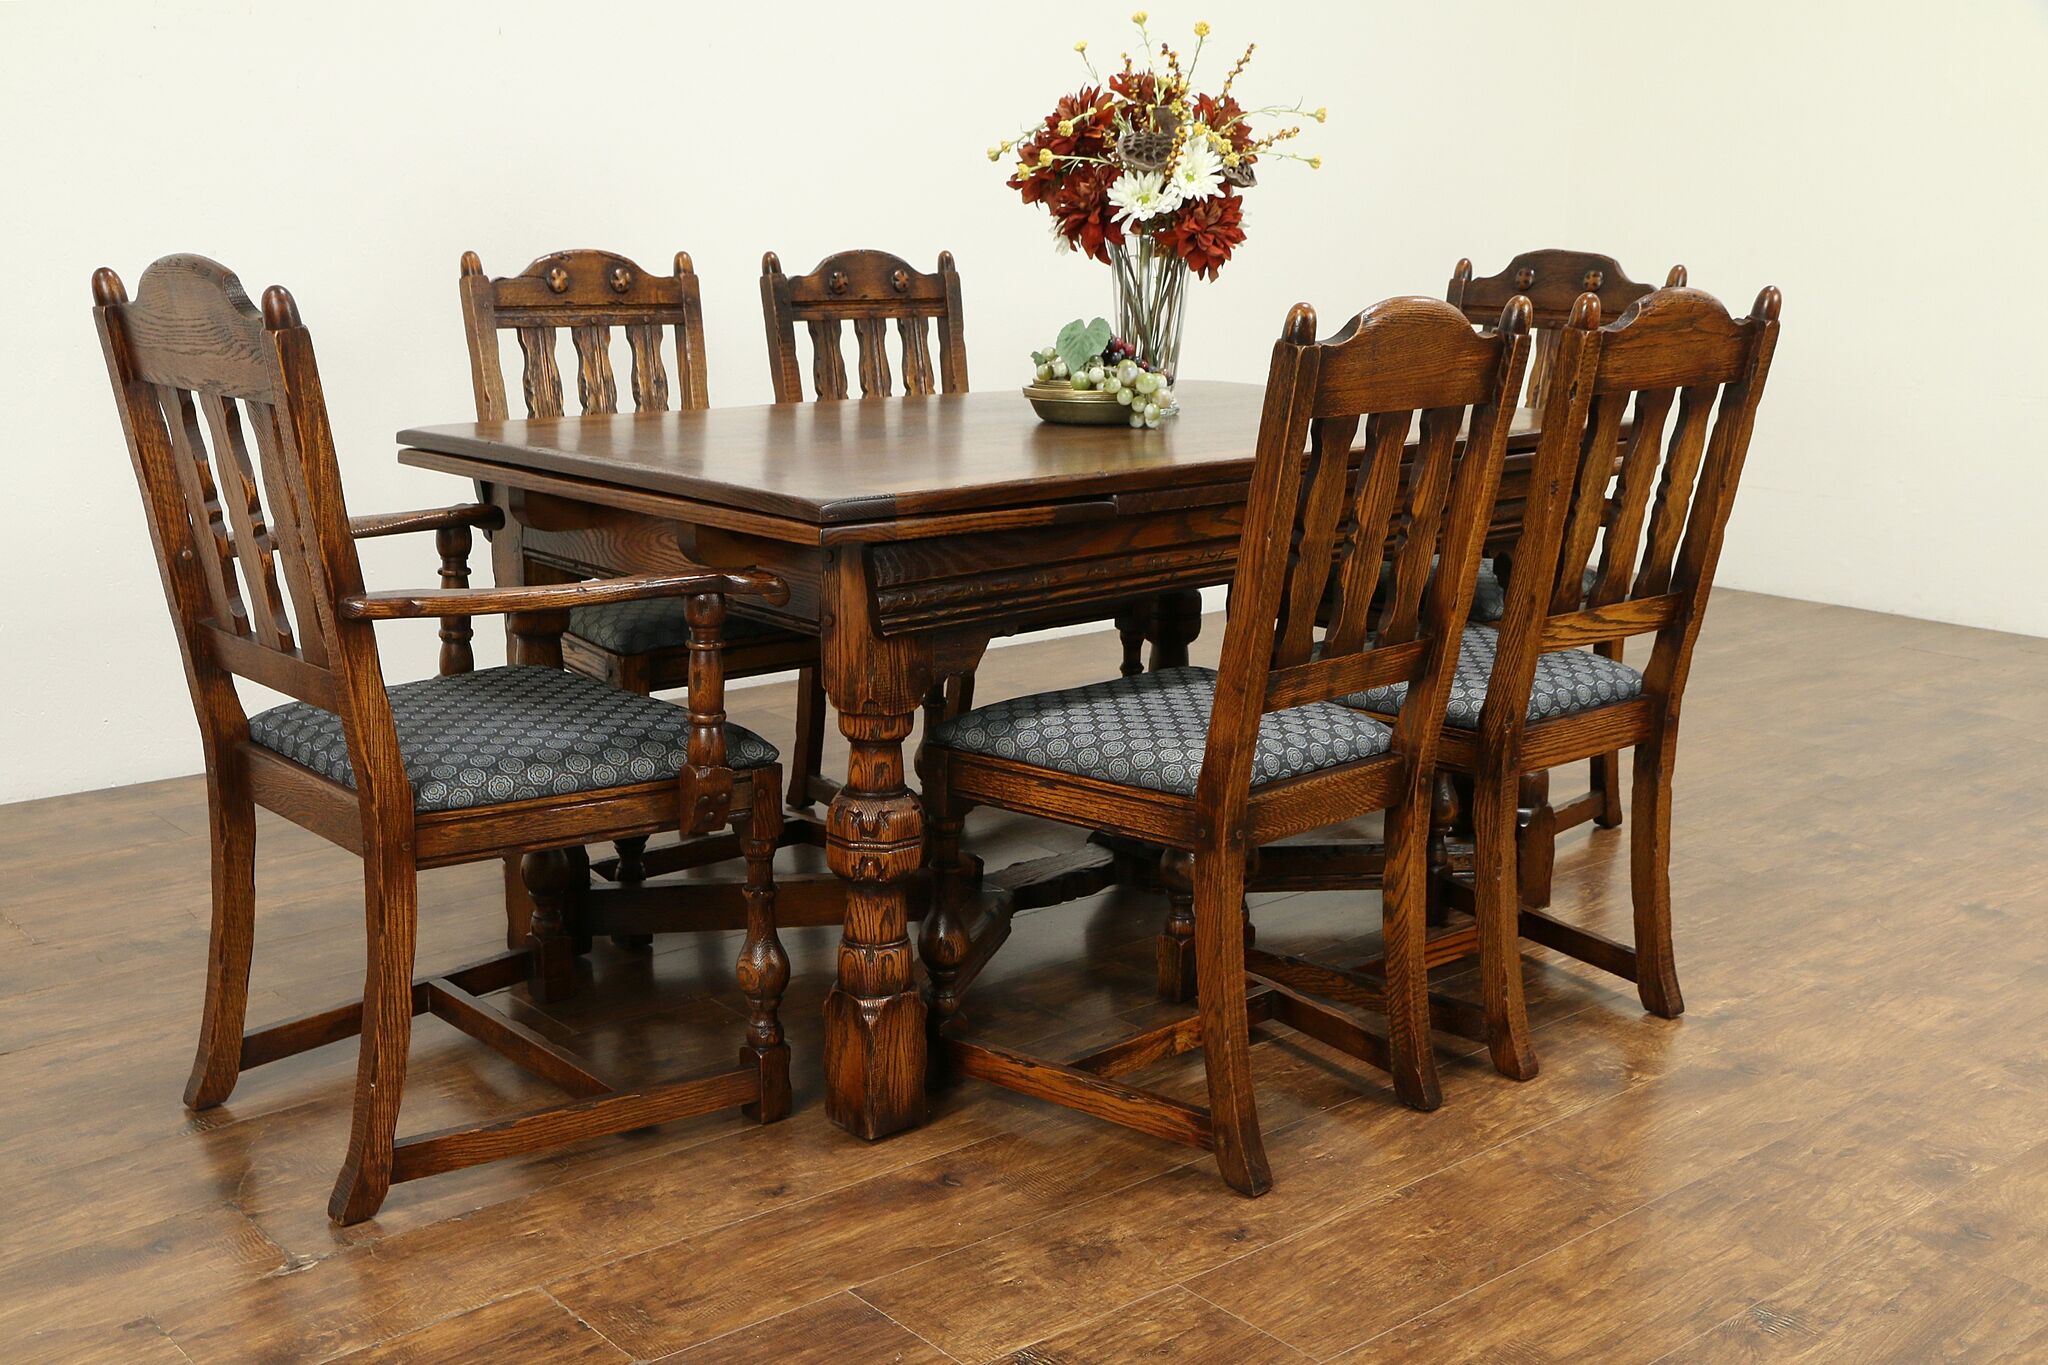 Sold Oak English Tudor Antique 1920 Dining Set Table 2 Leaves 6 Chairs 35295 Harp Gallery Antiques Furniture